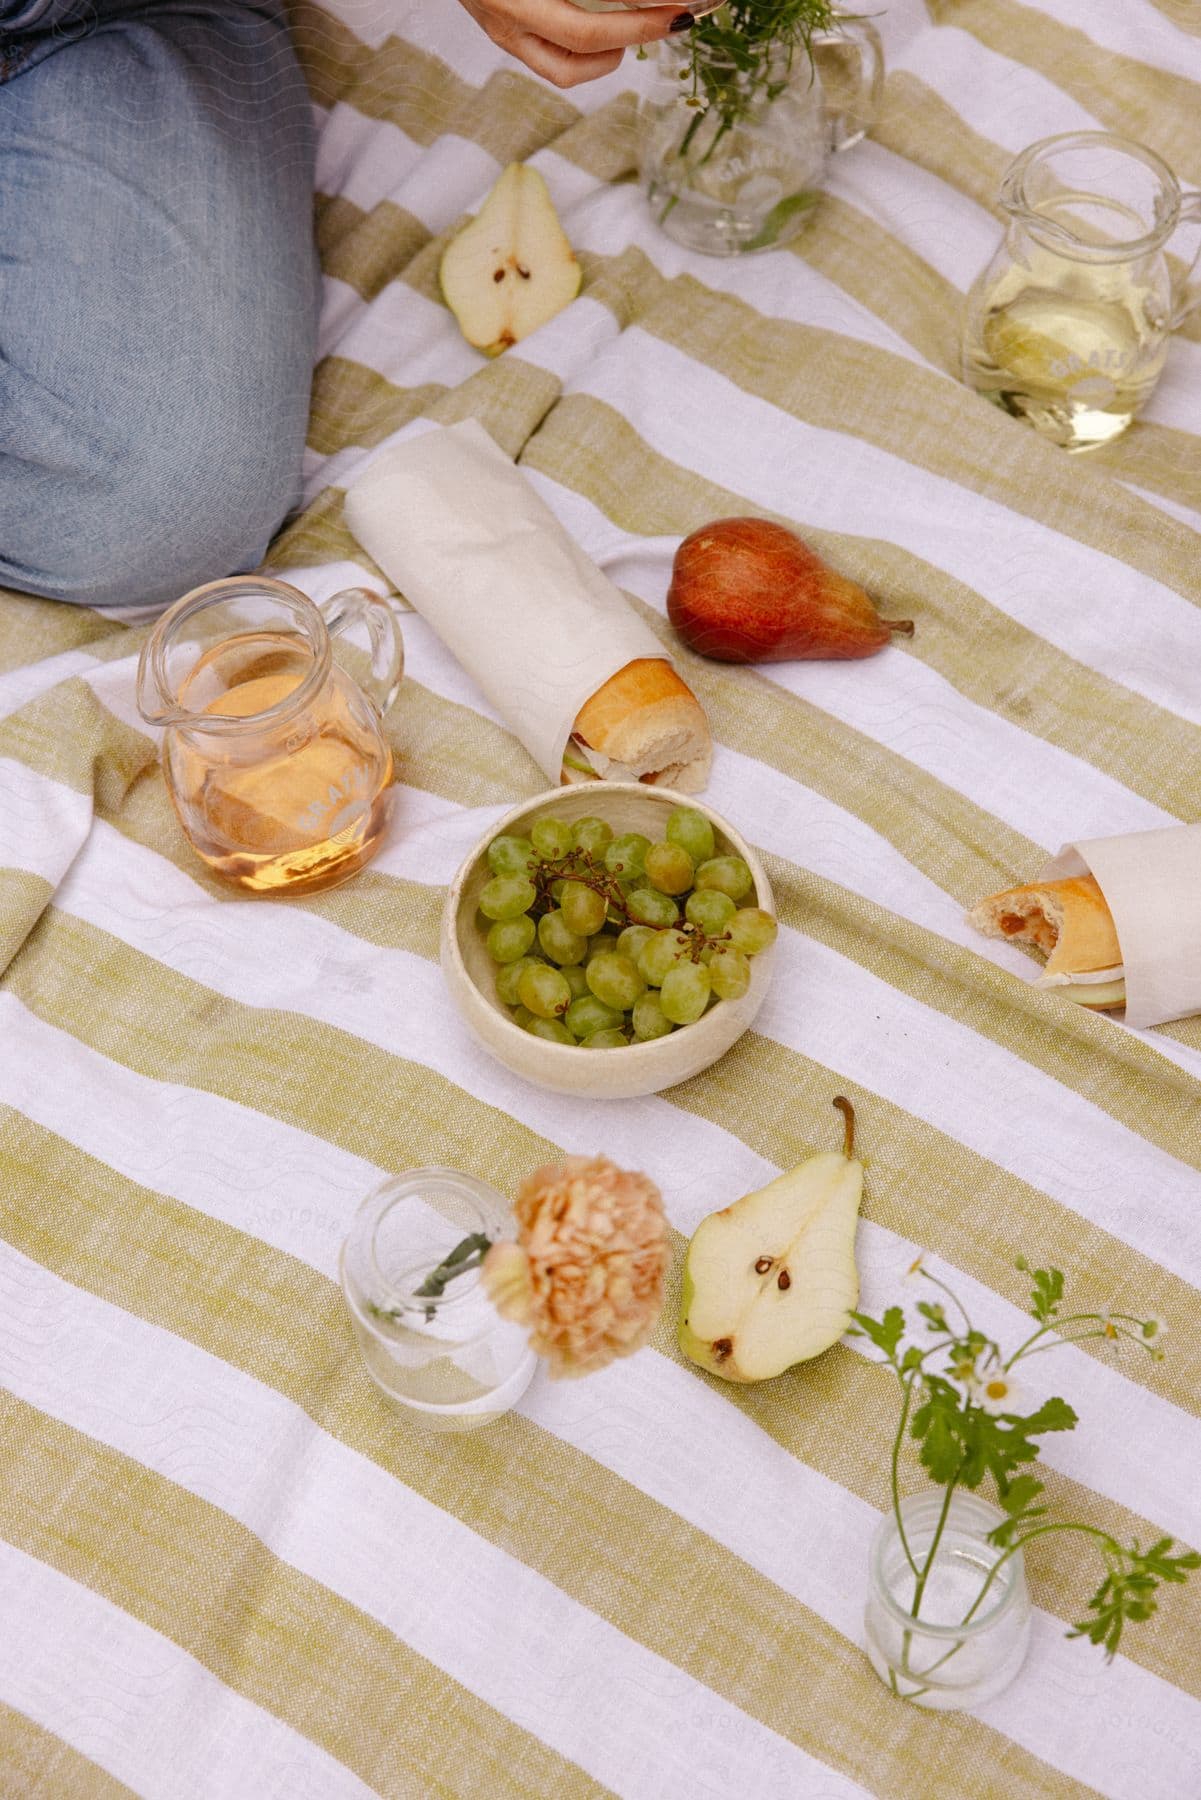 A person sitting on a picnic blanket with drinks, fruits, and sandwiches